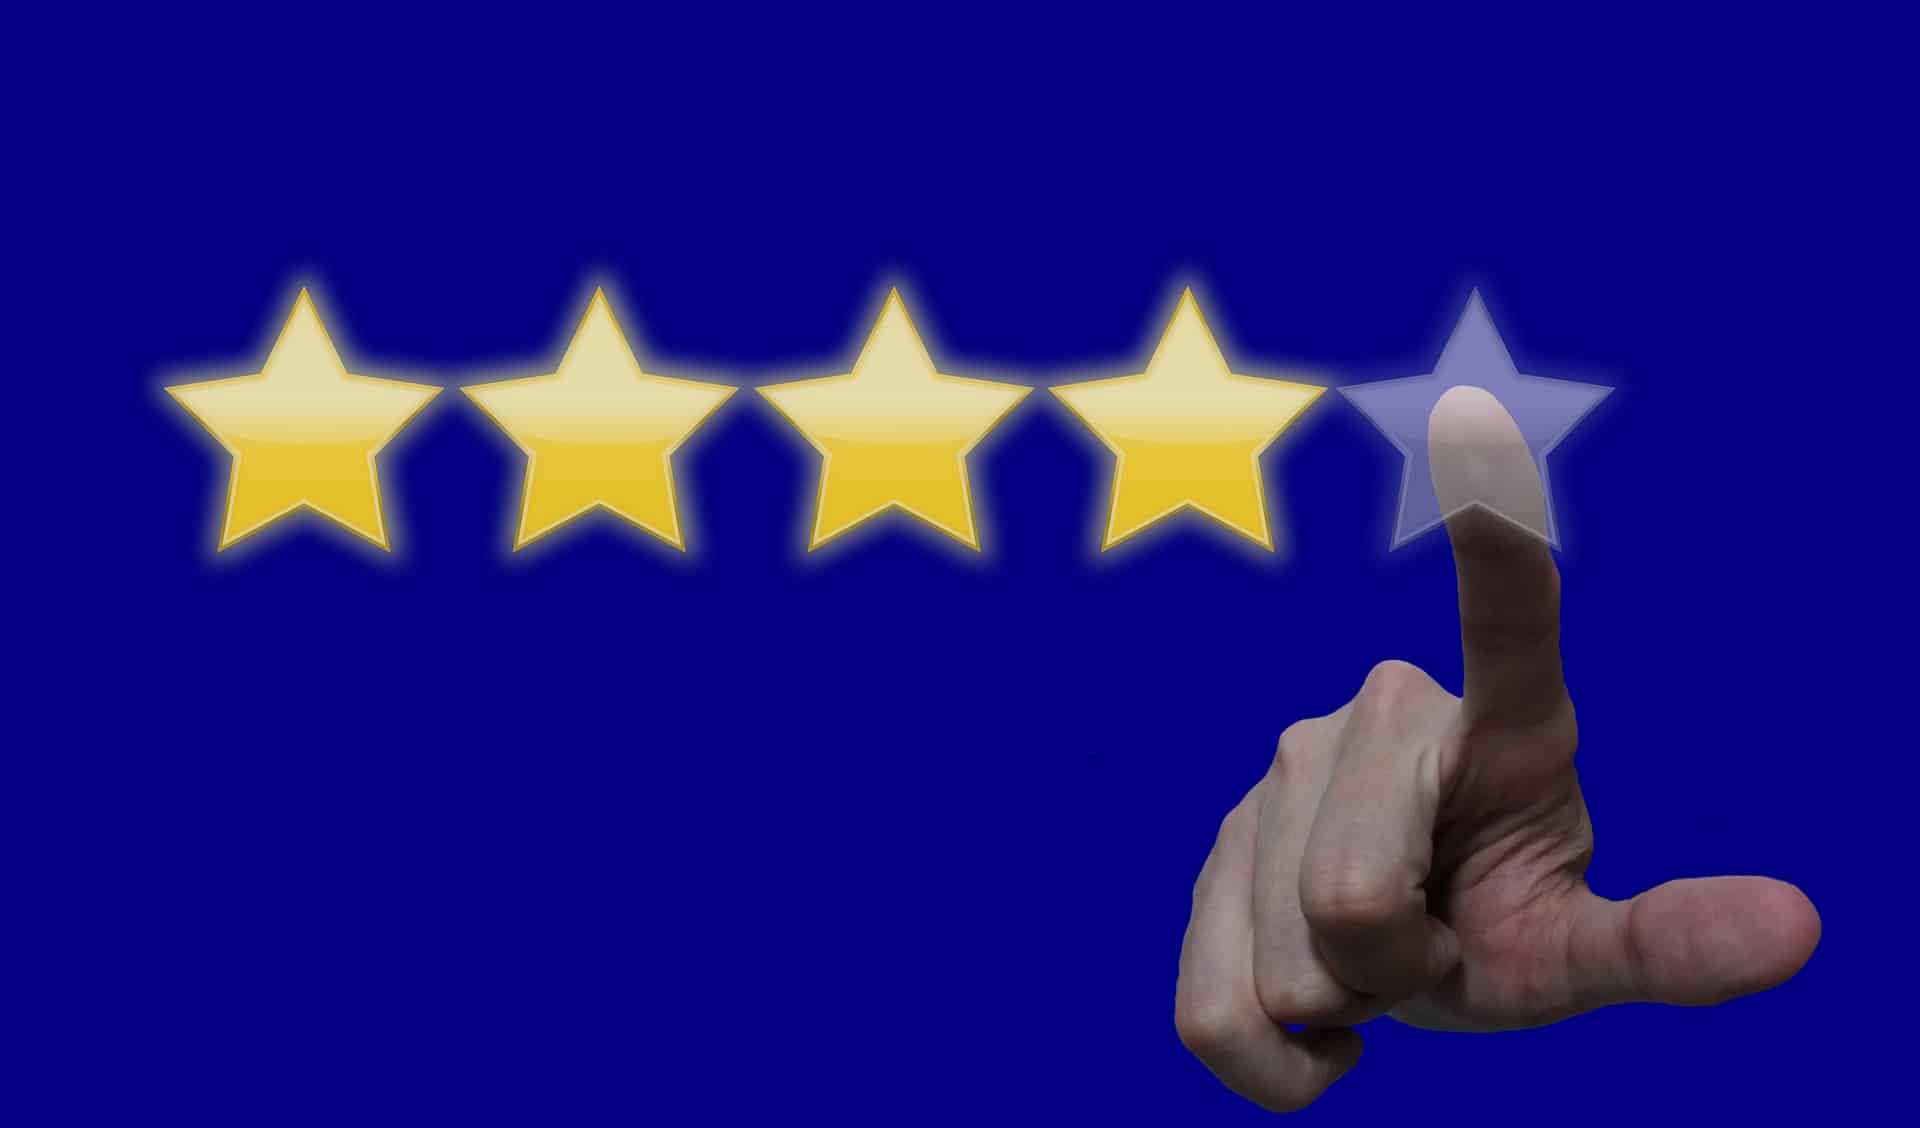 A hand reaching out to press a star in order to leave a 5 star review